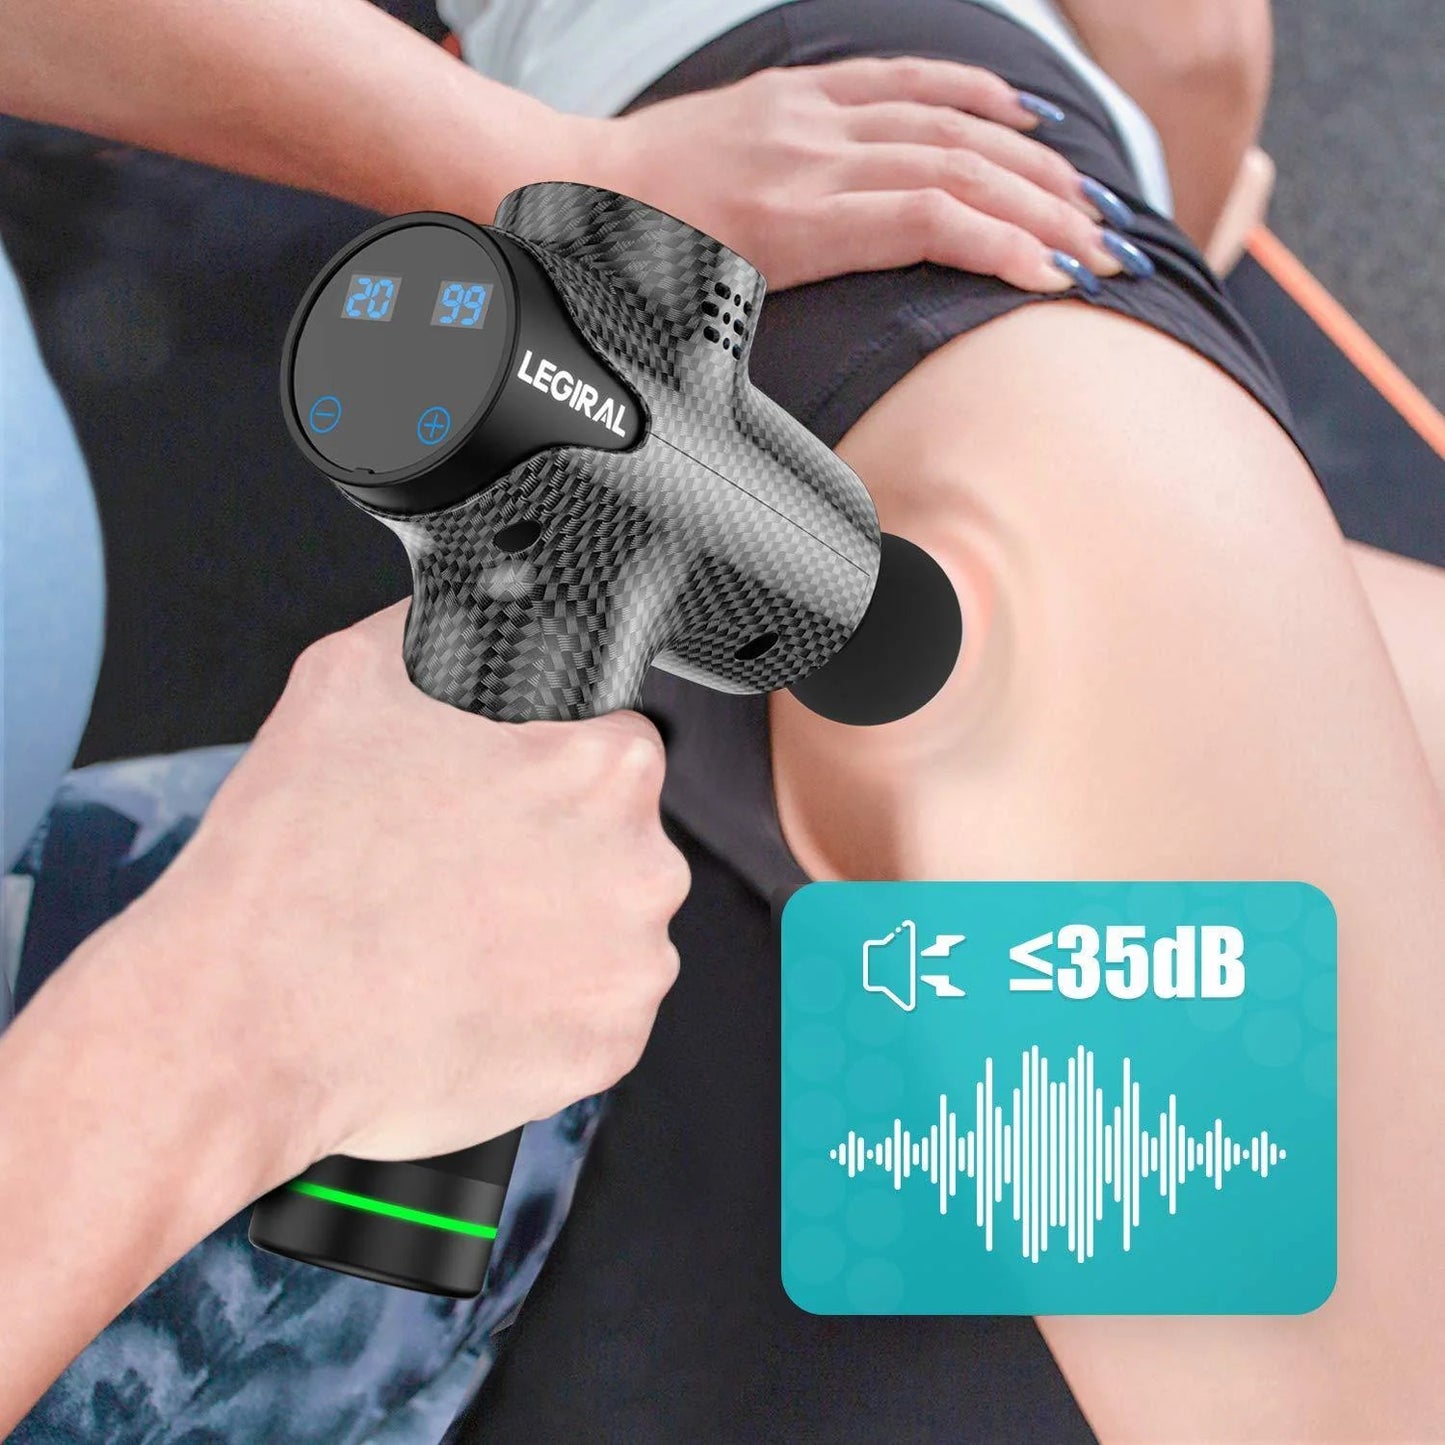 Legiral LE3 Deep Tissue Percussion Massage Gun - Powerful Quiet Motor with 20 Speeds and 6 Attachments for Muscle Recovery and Pain Relief